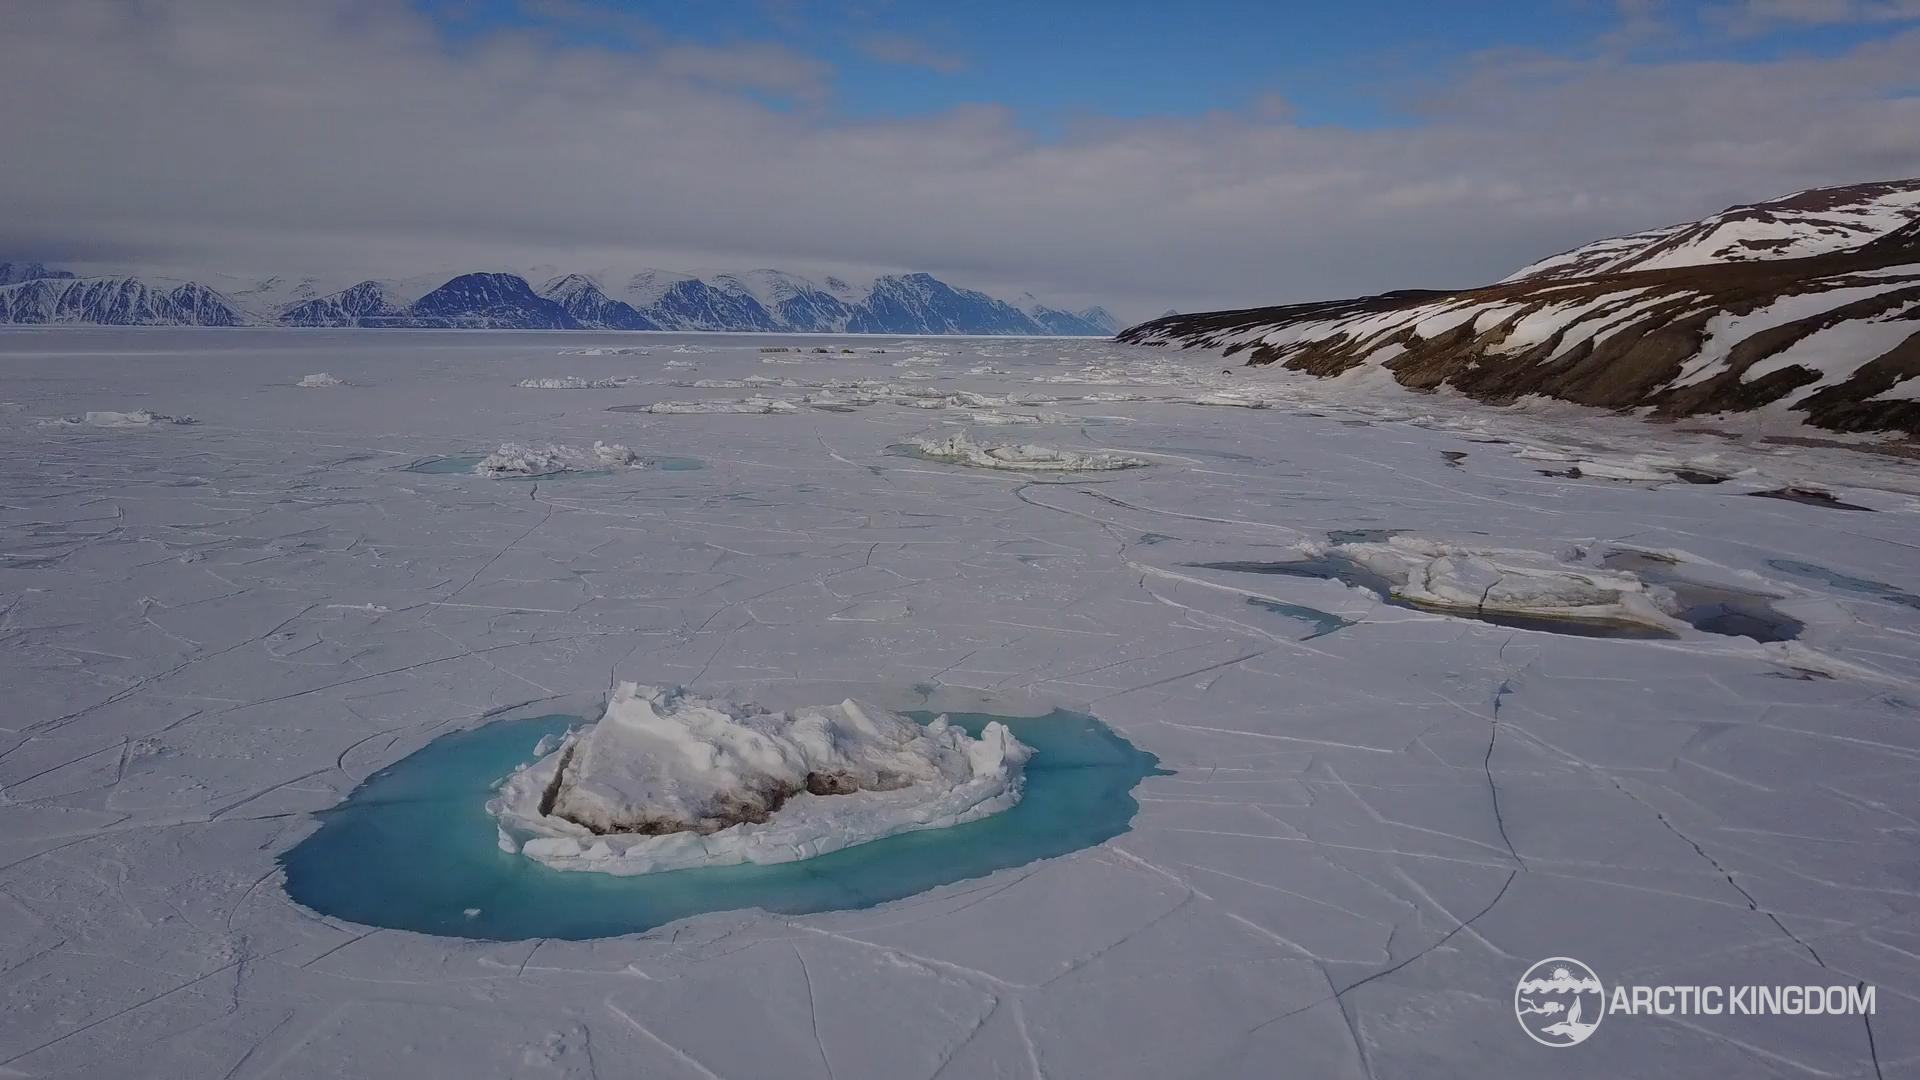 Filming in the Arctic: Drone Footage of Wildlife Nature | Arctic Kingdom